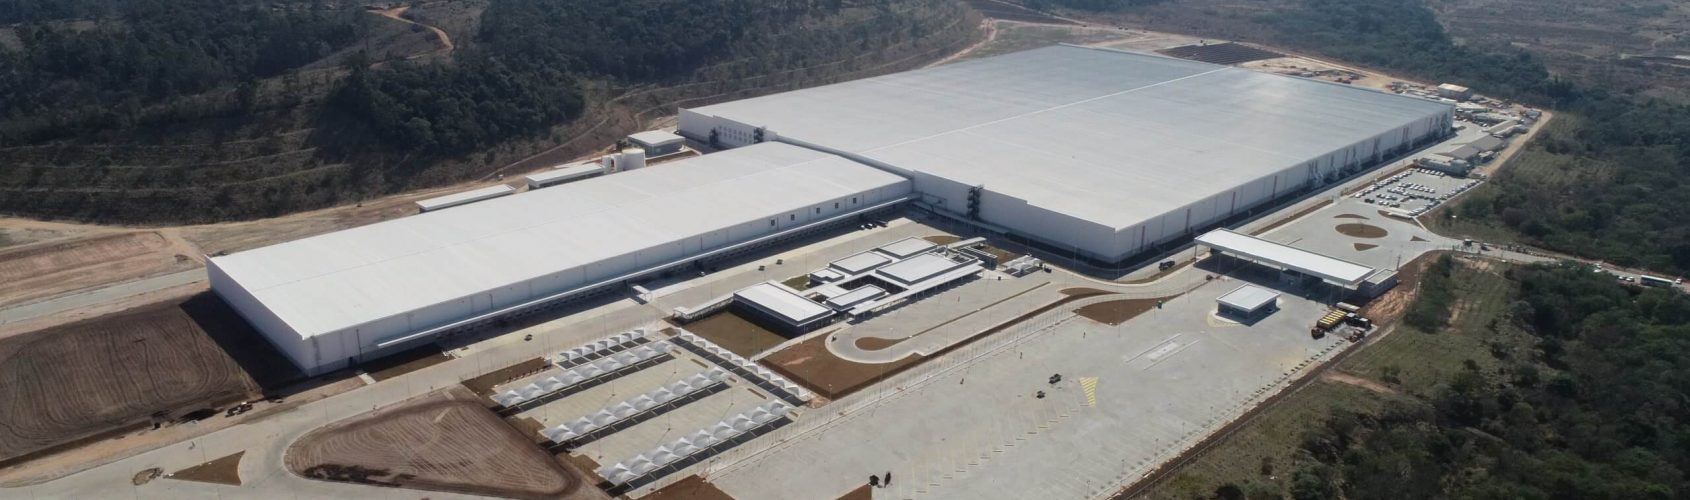 Automated distribution center for Lojas Renner, South America, from aboven, von oben